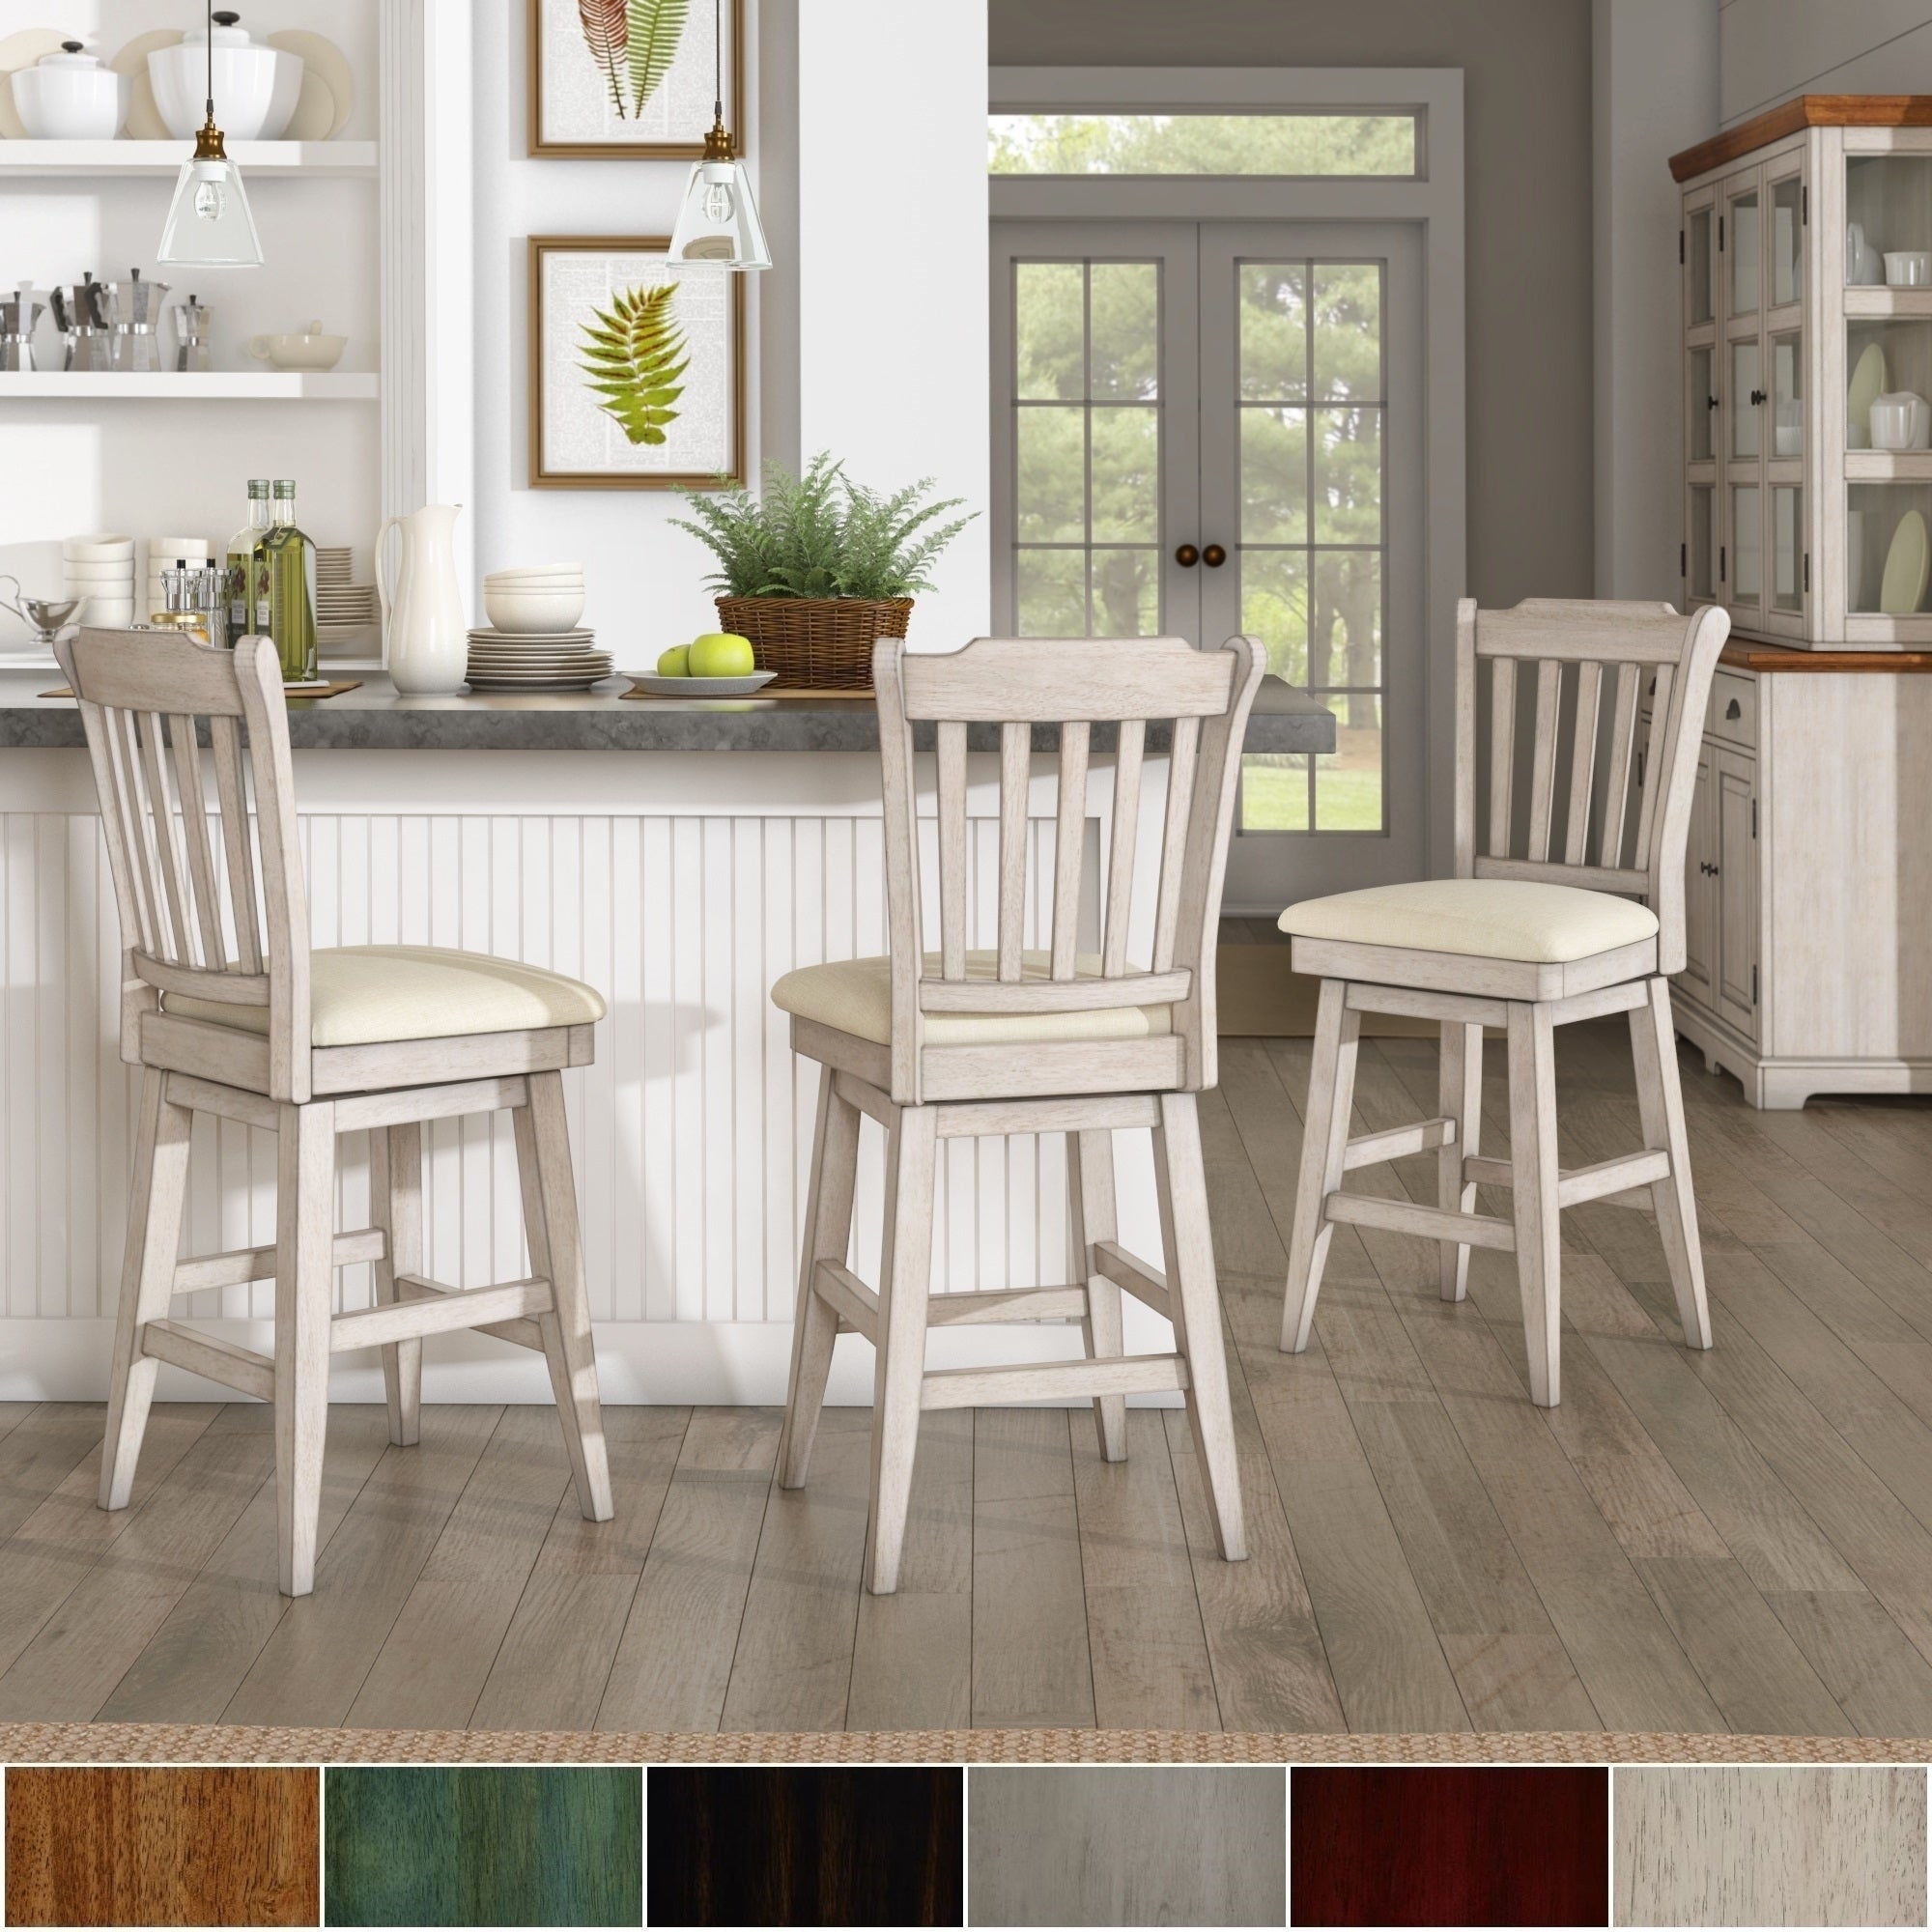 Buy Swivel Kitchen Dining Room Chairs Online At Overstock Our